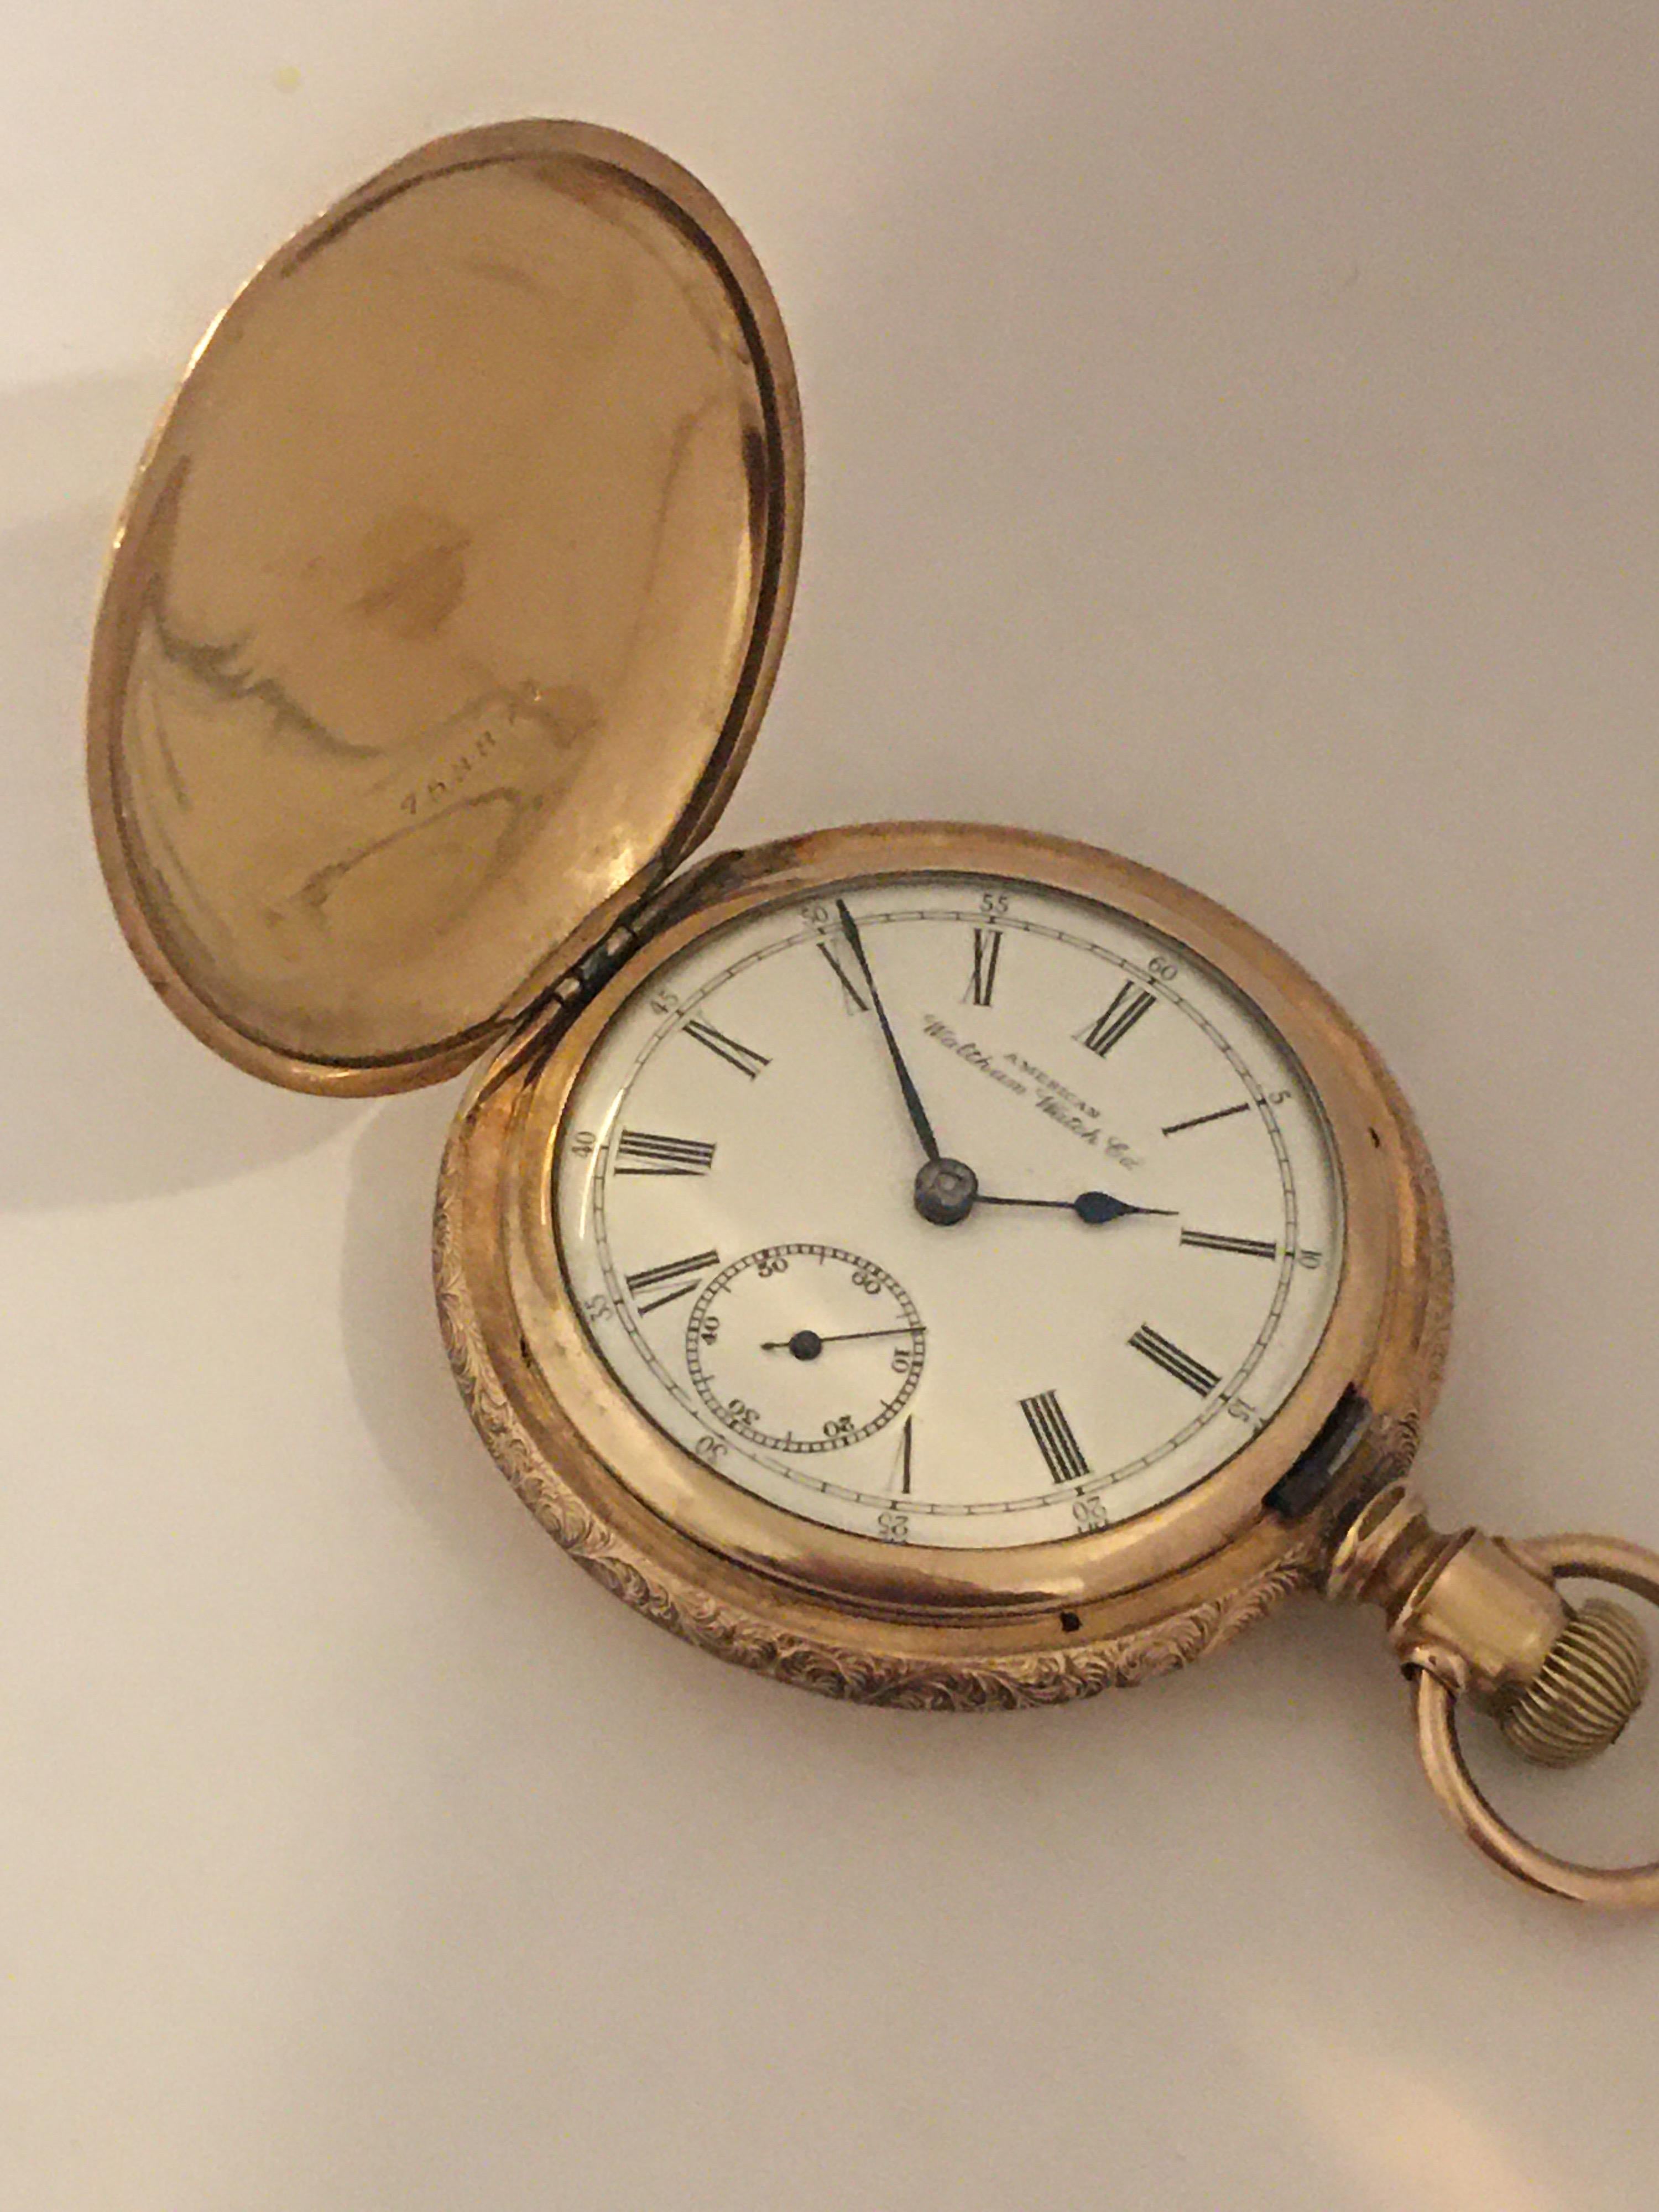 14K Gold-Filled Full Hunter American Waltham Watch Co.Antique Gents Pocket Watch 5